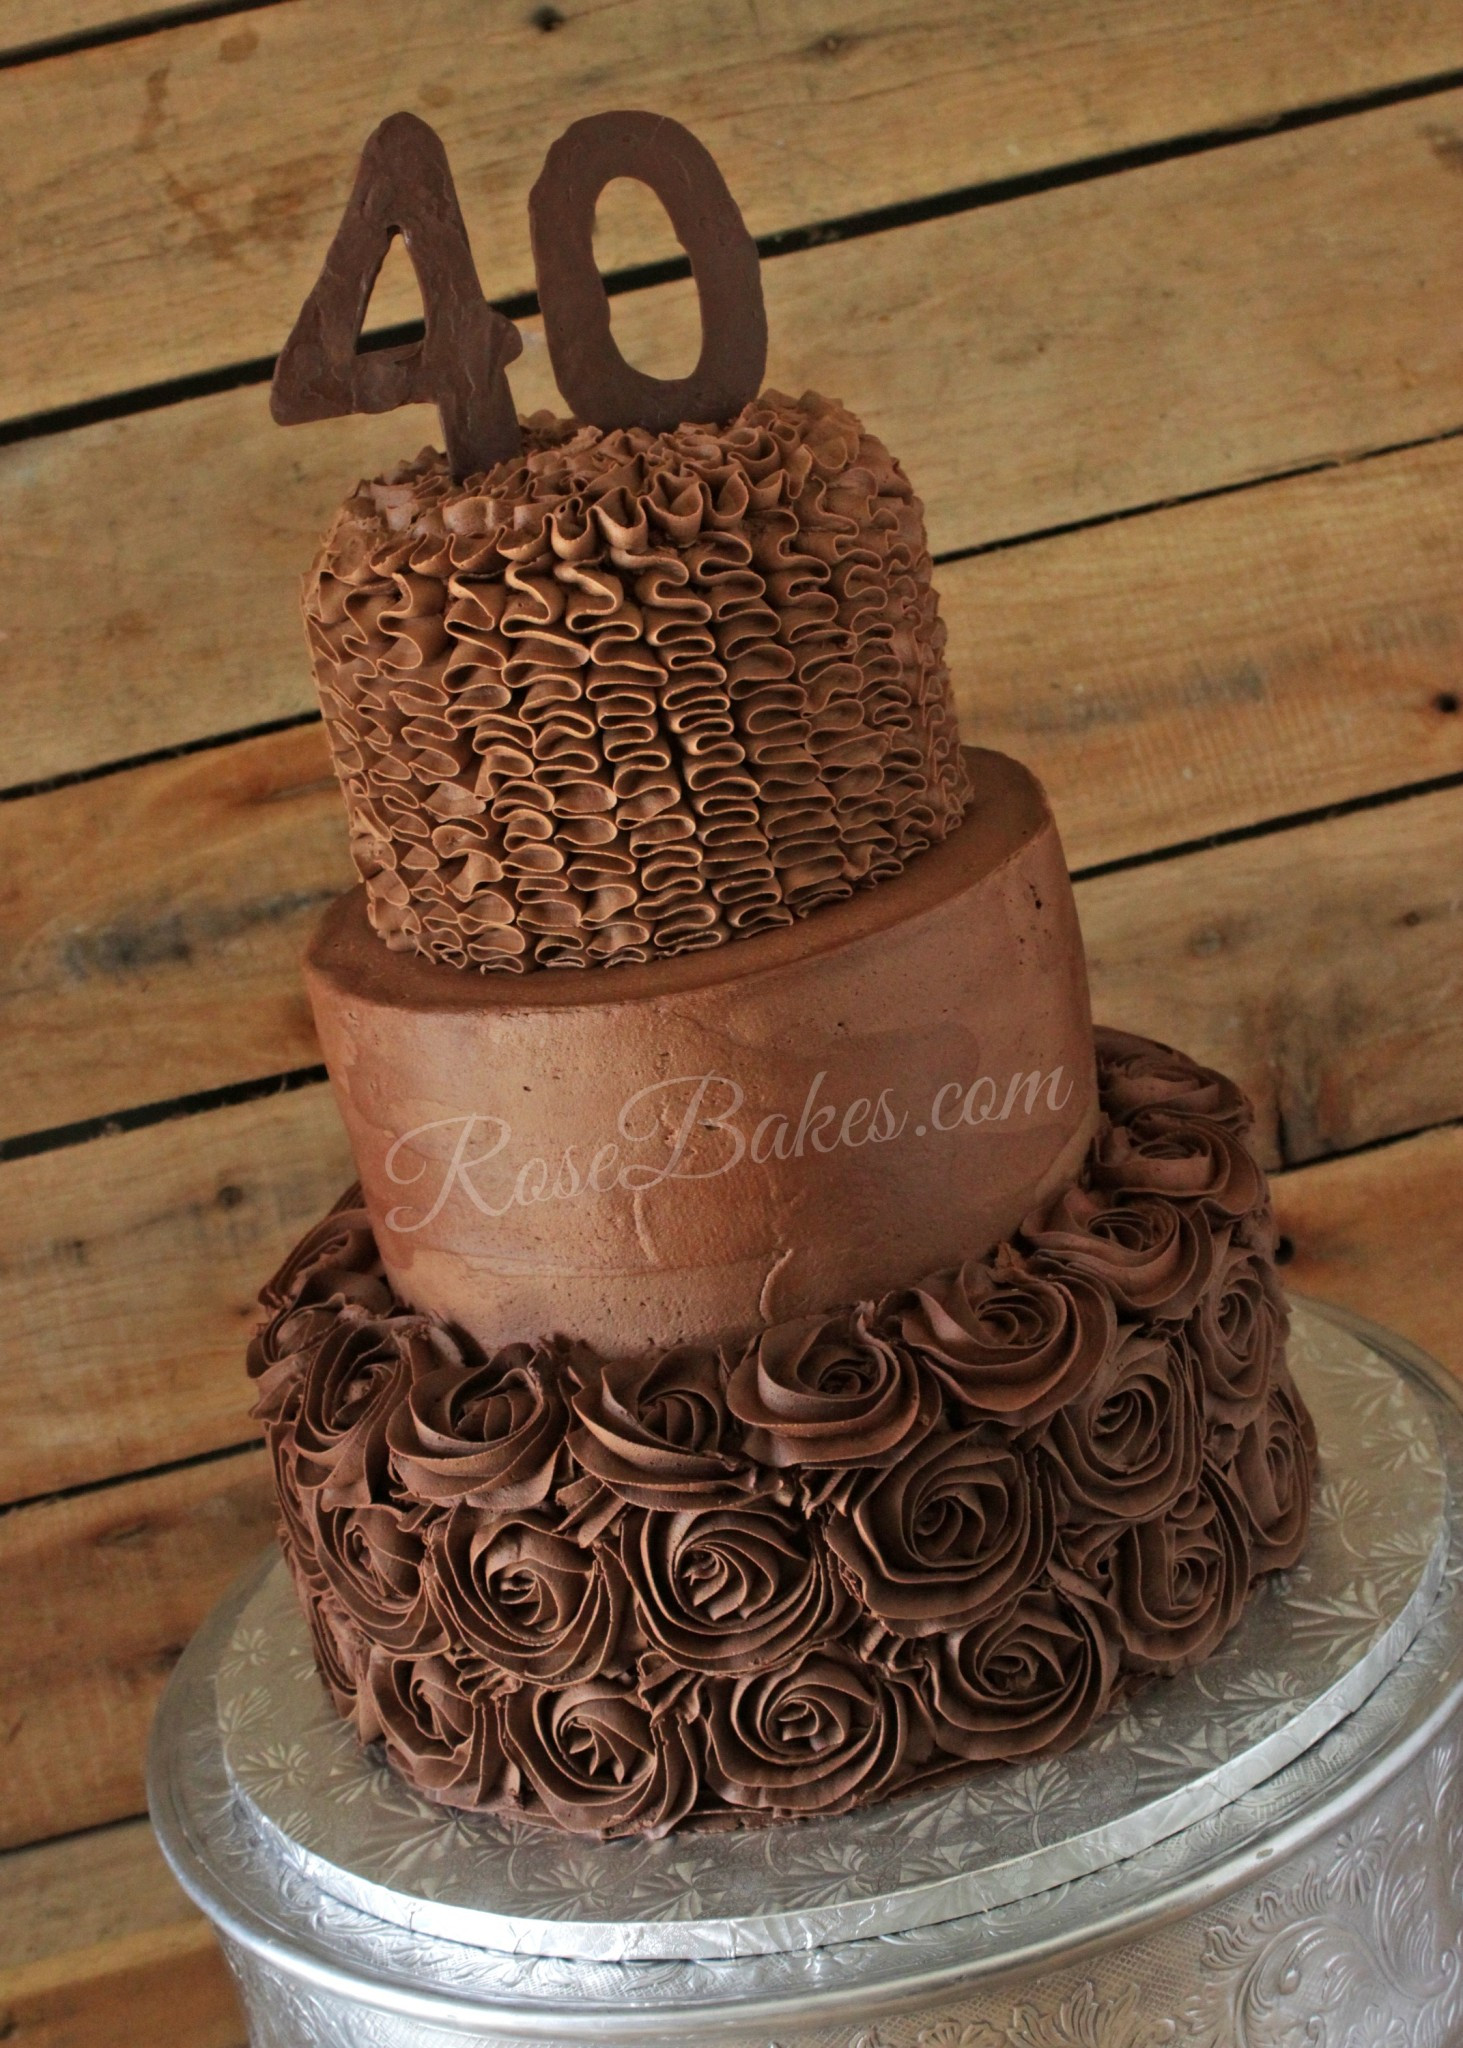 40th Birthday Cake Decorating Ideas
 "Over the Hill" 40th Birthday Cake Rose Bakes